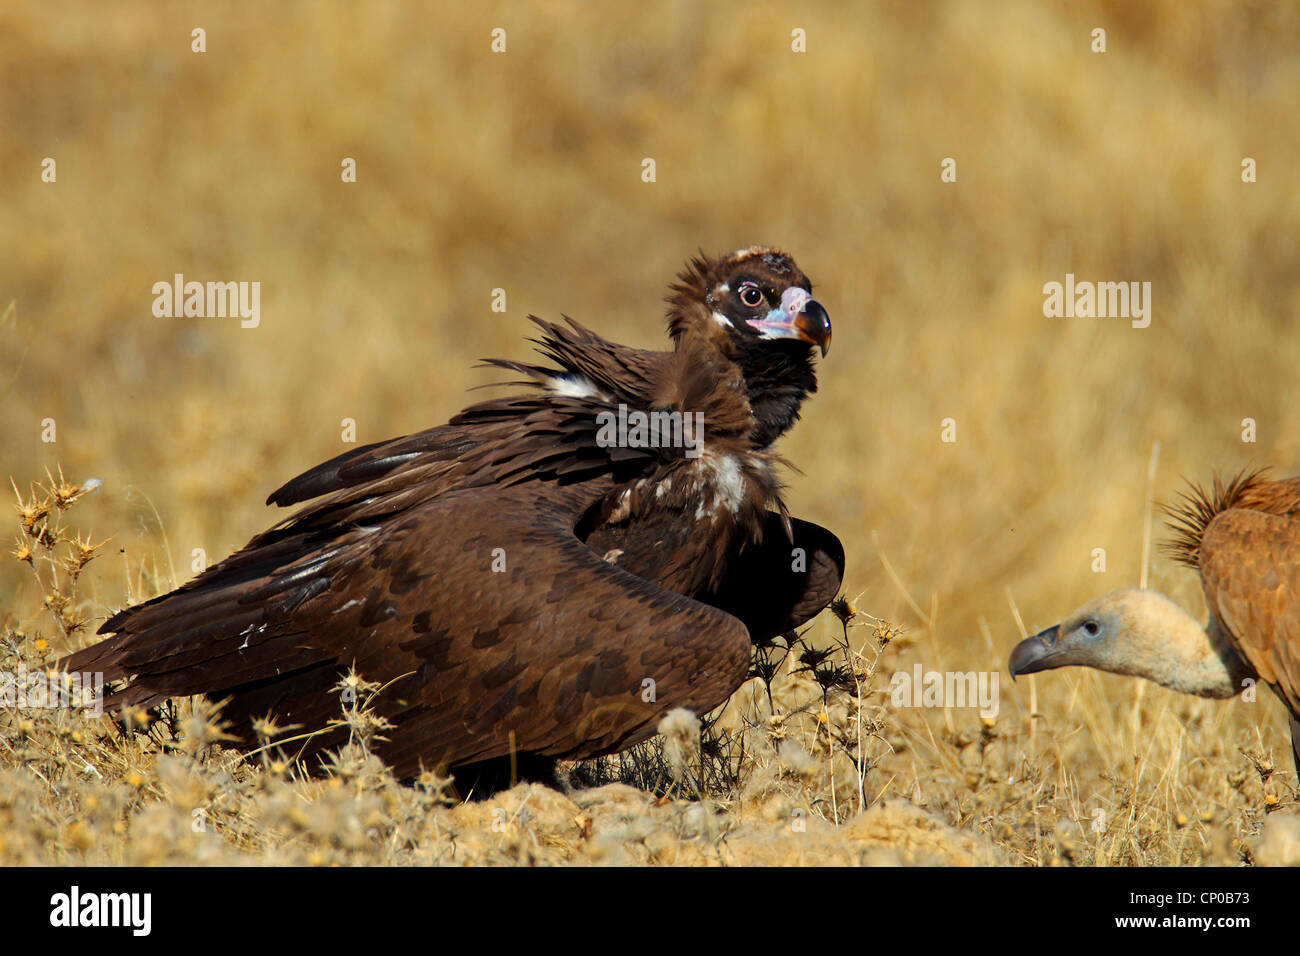 cinereous vulture (Aegypius monachus), sitting on the ground with griffon vulture, Spain, Extremadura Stock Photo